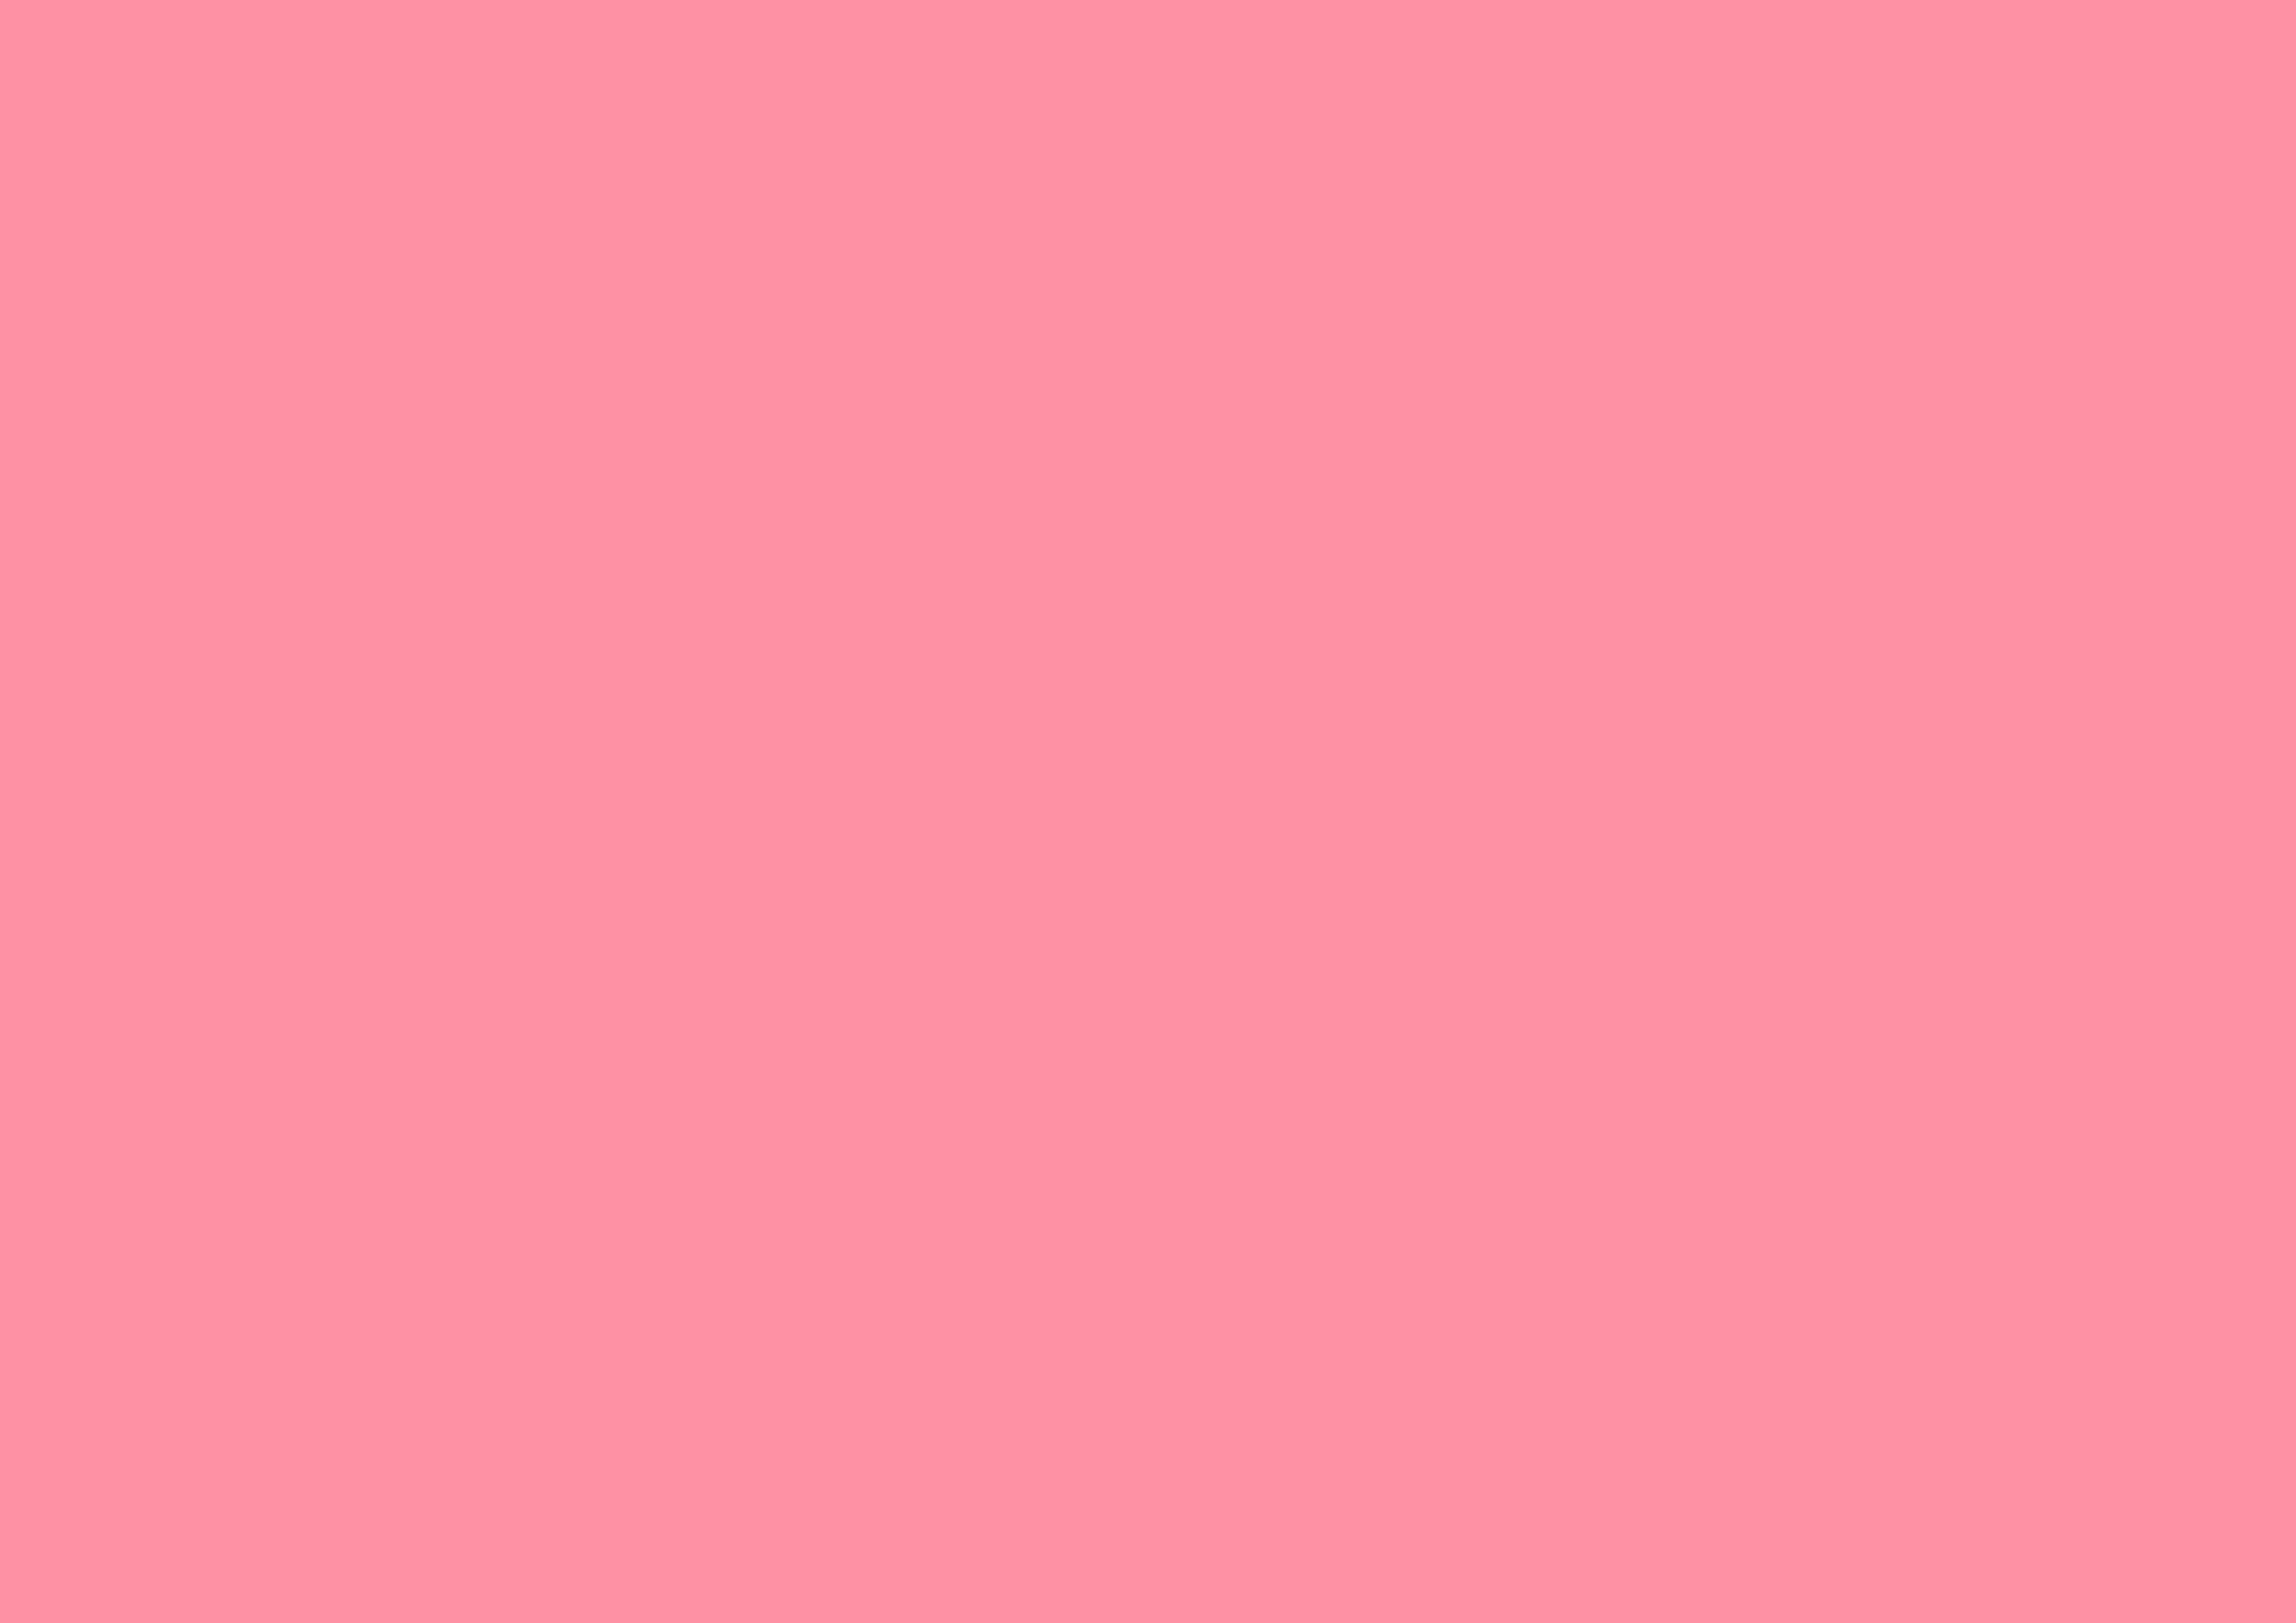 3508x2480 Salmon Pink Solid Color Background